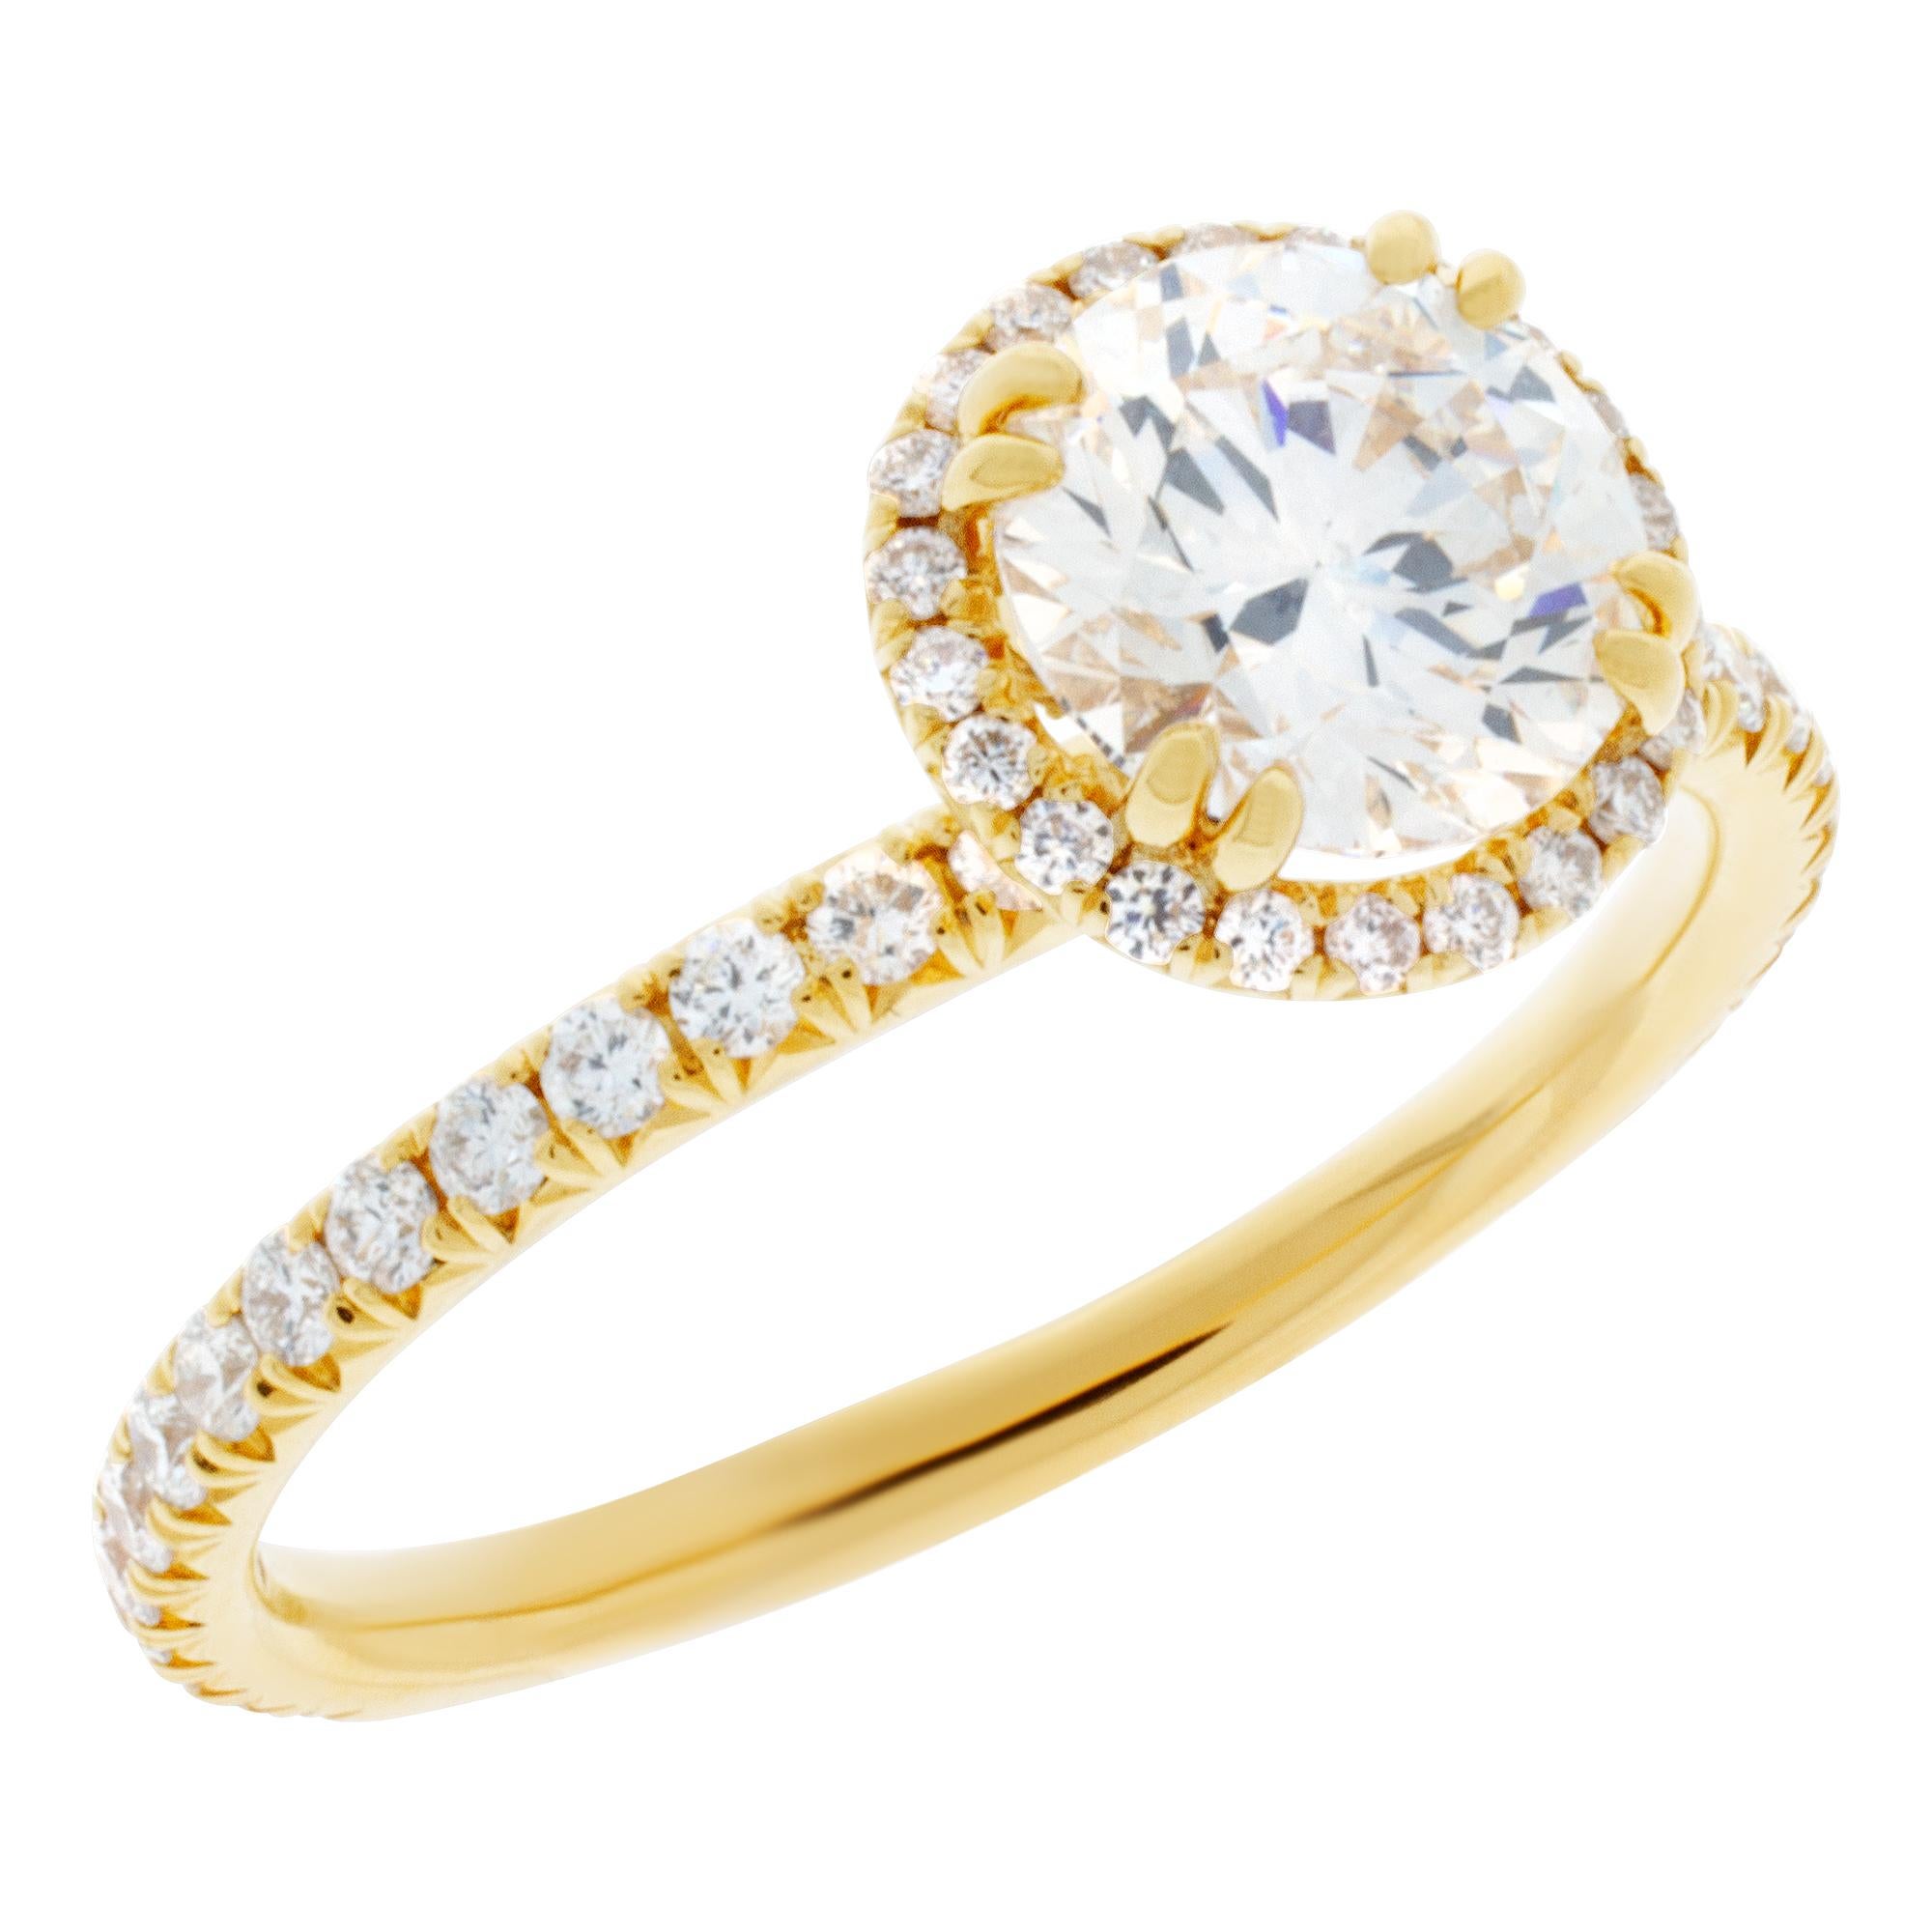 Modern GIA Certified Diamond Round Brilliant Cut 1.06 Carat Ring Set in 18k Yellow Gold For Sale